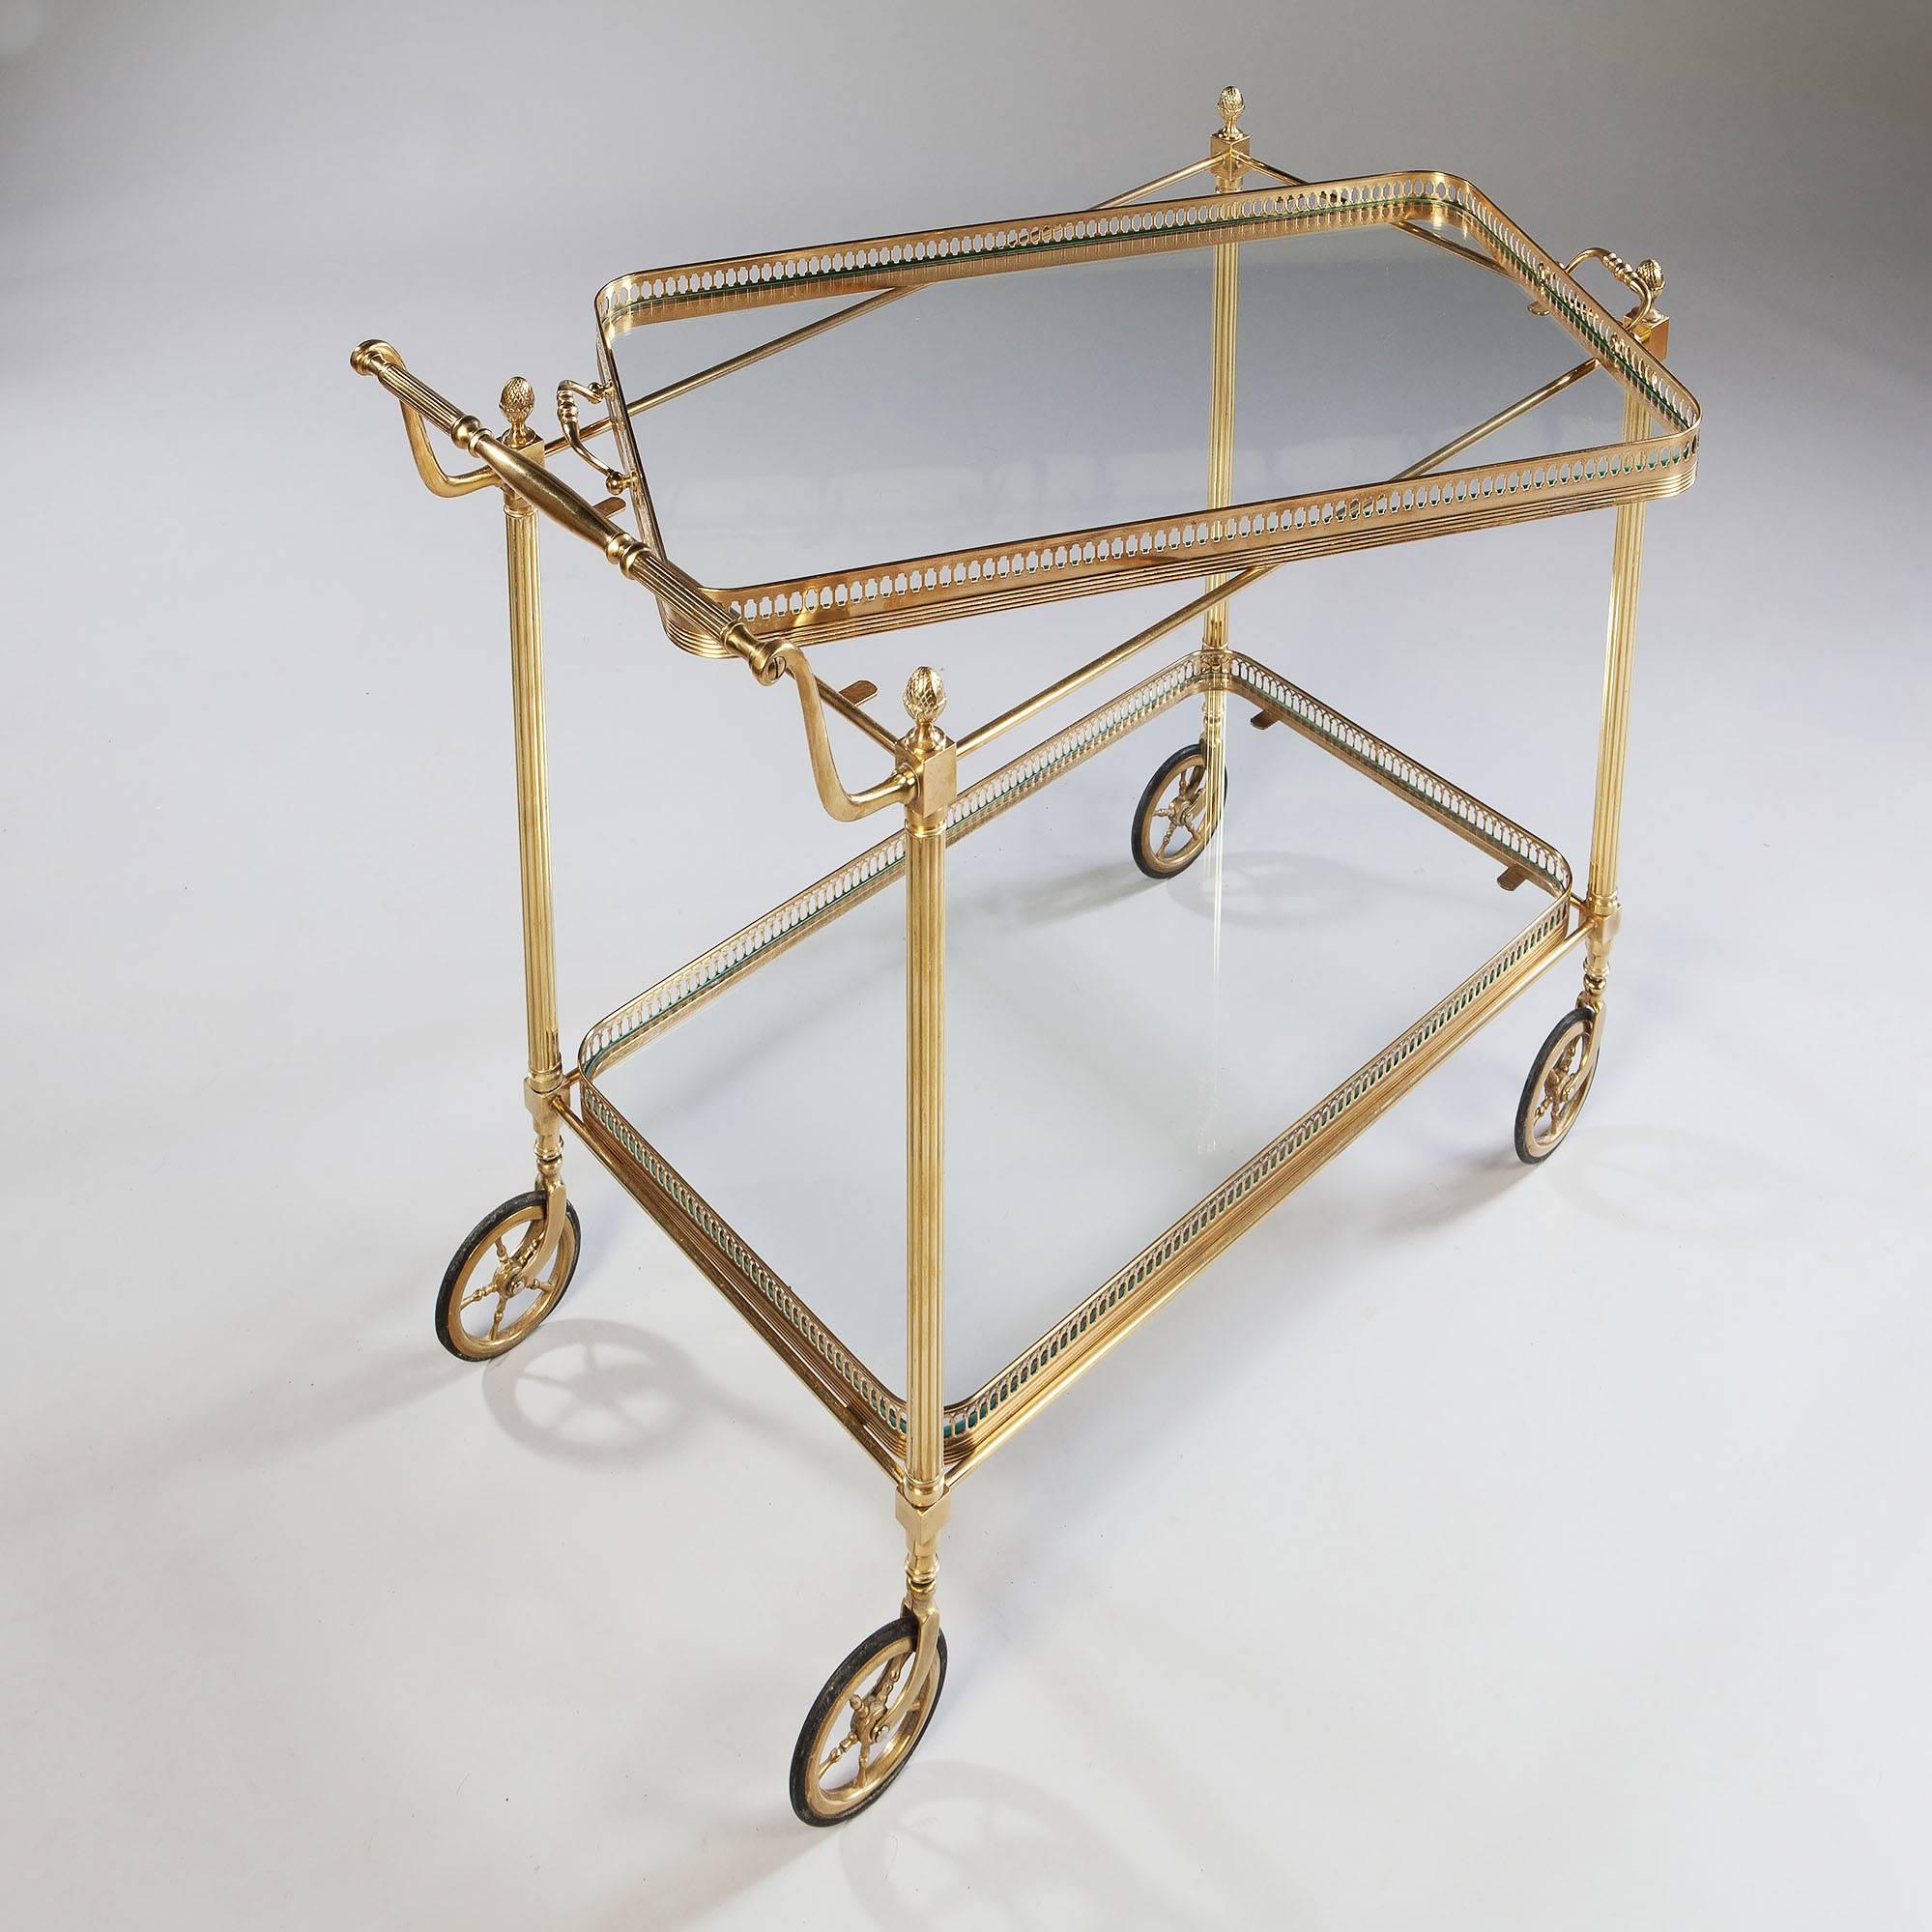 A fine polished brass drinks trolley by Maison Bagues, the trolley with two tiers and removable glass bottomed trays with pierced brass galleries, the upper tray with handles. The brass casting and detail throughout of high quality and condition.